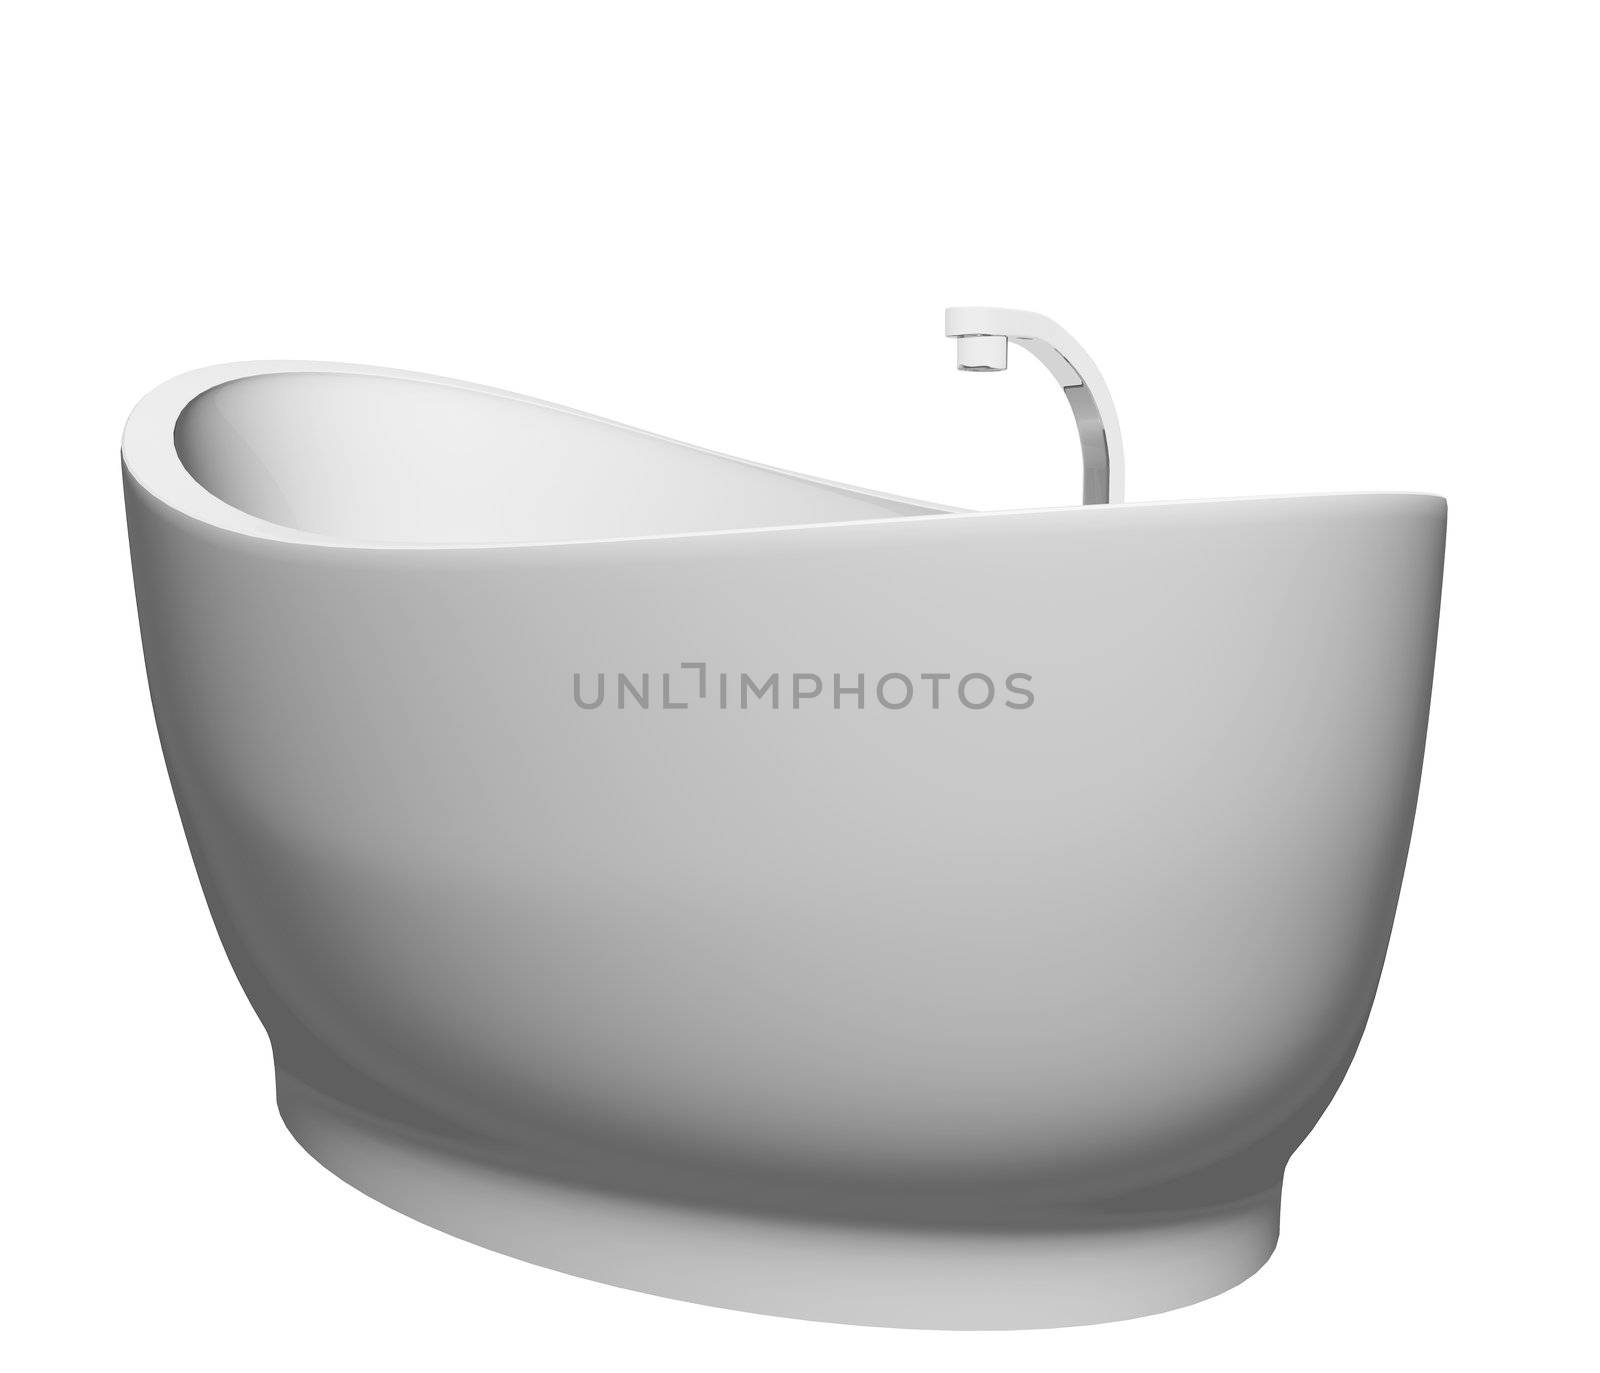 Pedestal modern white bathtub with stainless steel fixtures, isolated against a white background